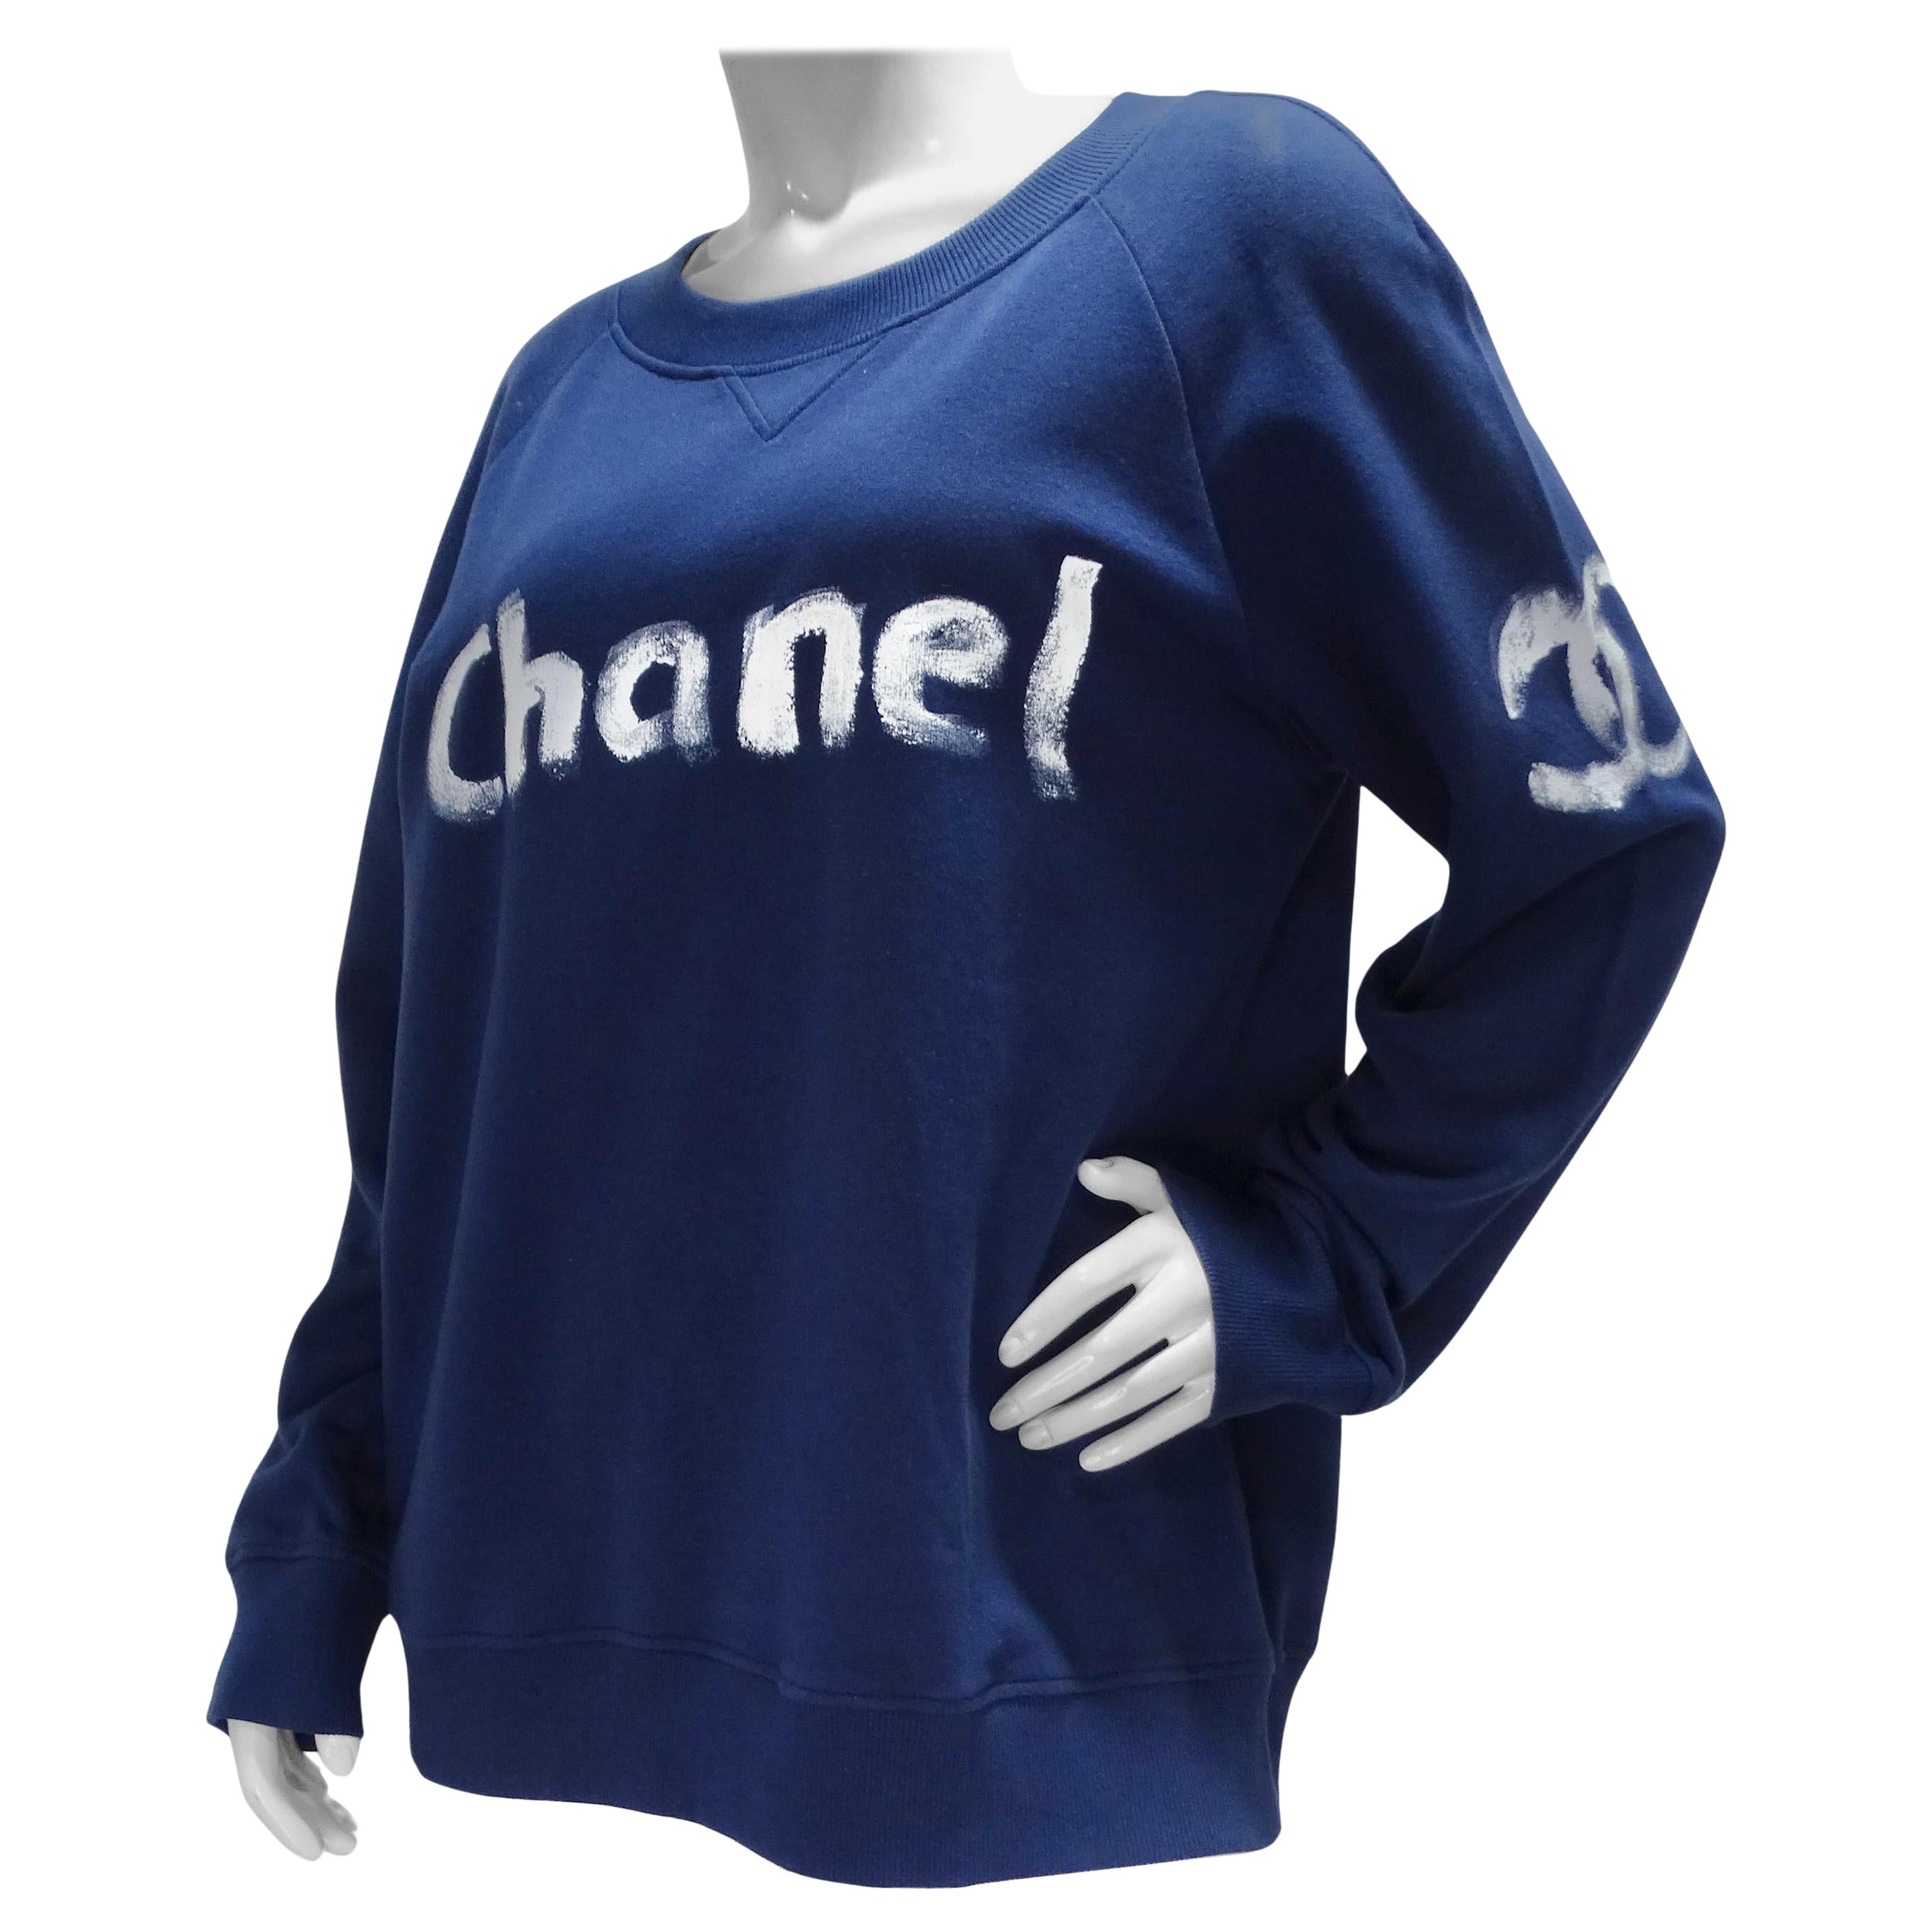 Chanel 2013 Limited Edition Navy Logo Sweatshirt For Sale